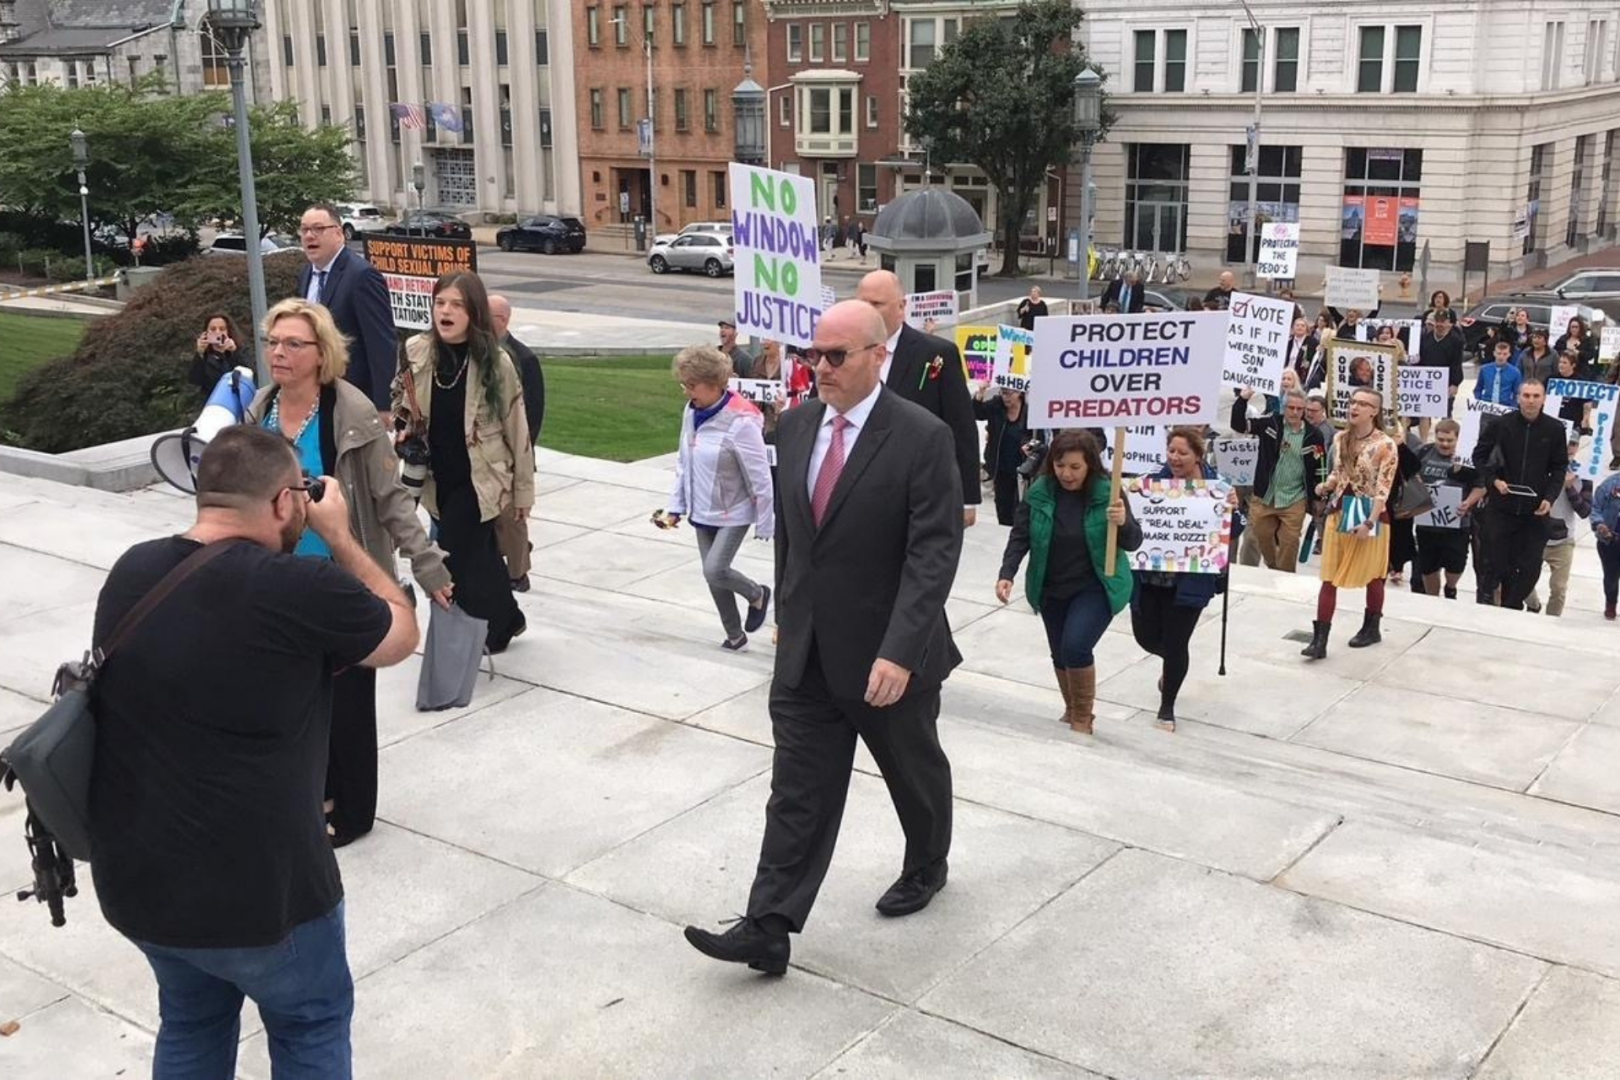 Shaun Dougherty lobbying for changes to the statute of limitations in Harrisburg in 2019. (Courtesy of Dougherty)